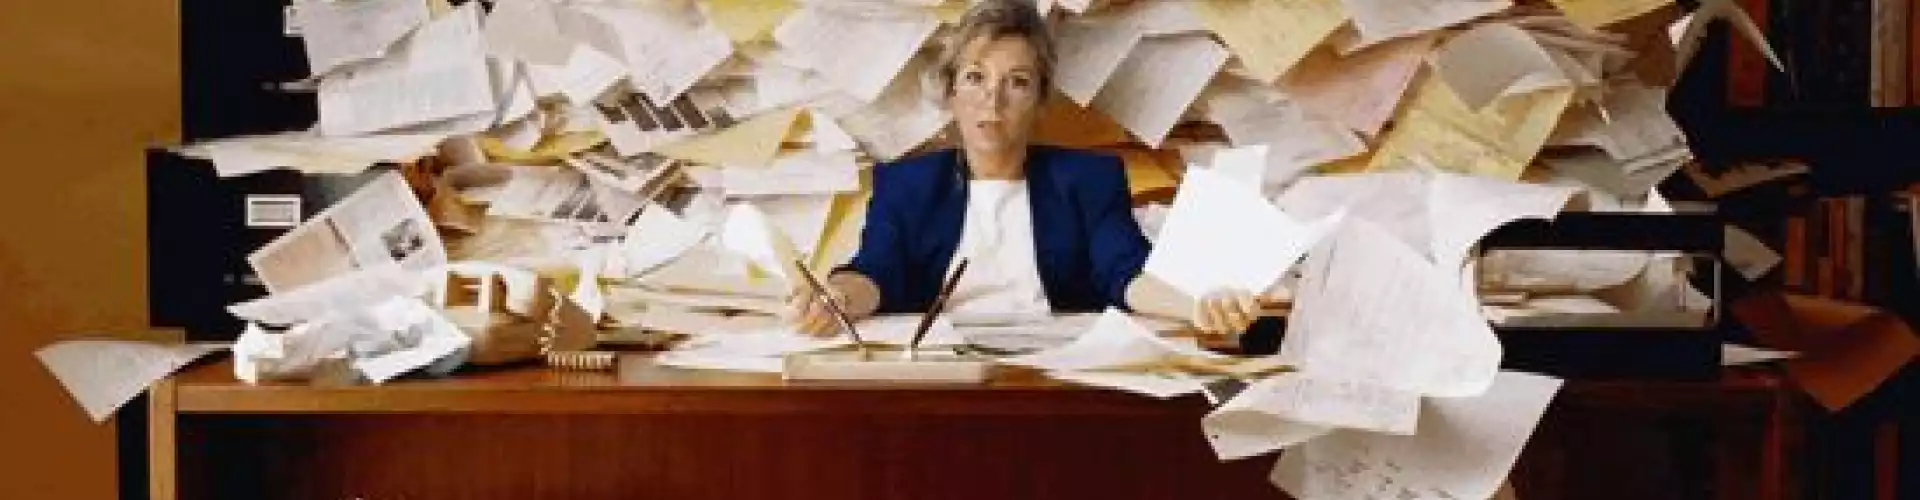 Overwhelmed by Your To Do List? 3 Tips for Breaking Free